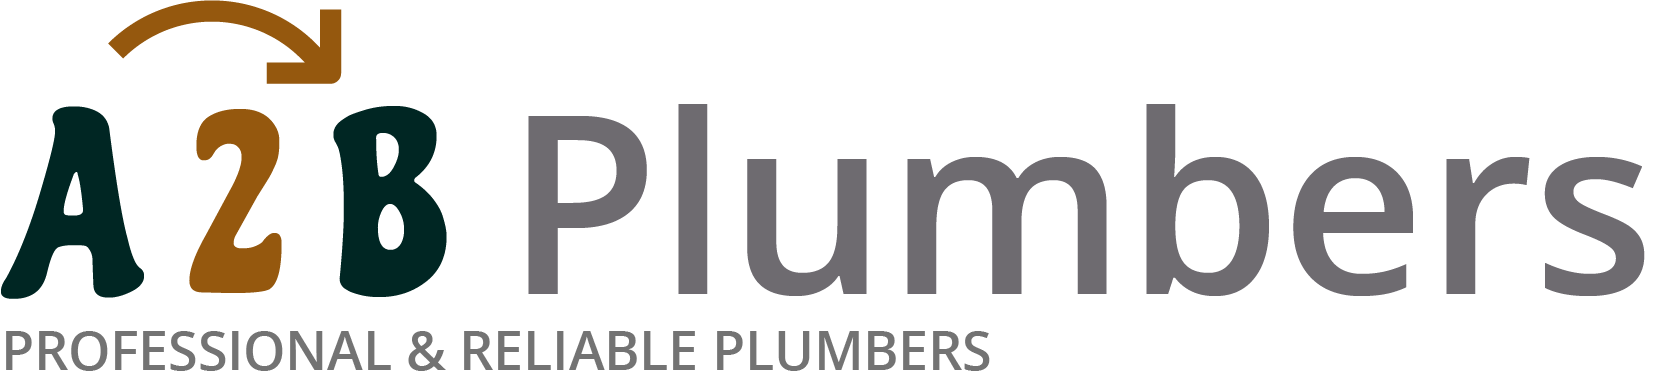 If you need a boiler installed, a radiator repaired or a leaking tap fixed, call us now - we provide services for properties in Spalding and the local area.